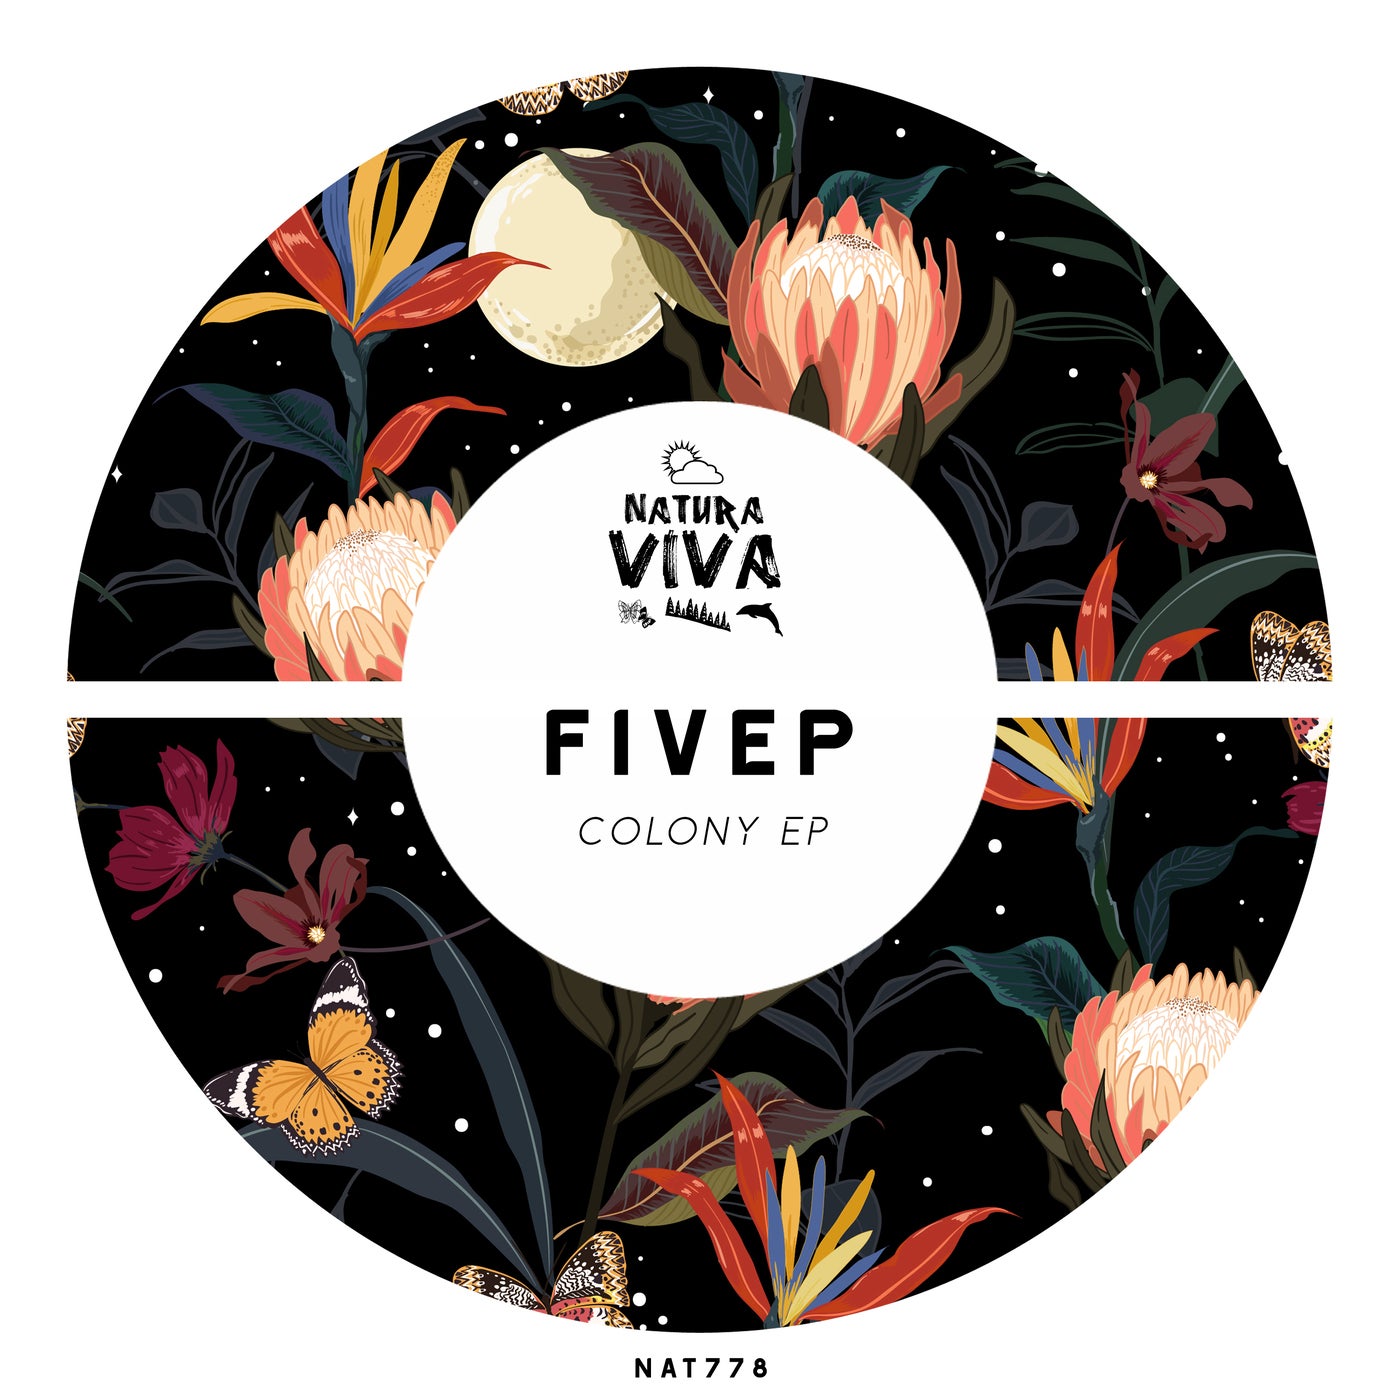 FiveP – Timelapse [MIRM074]